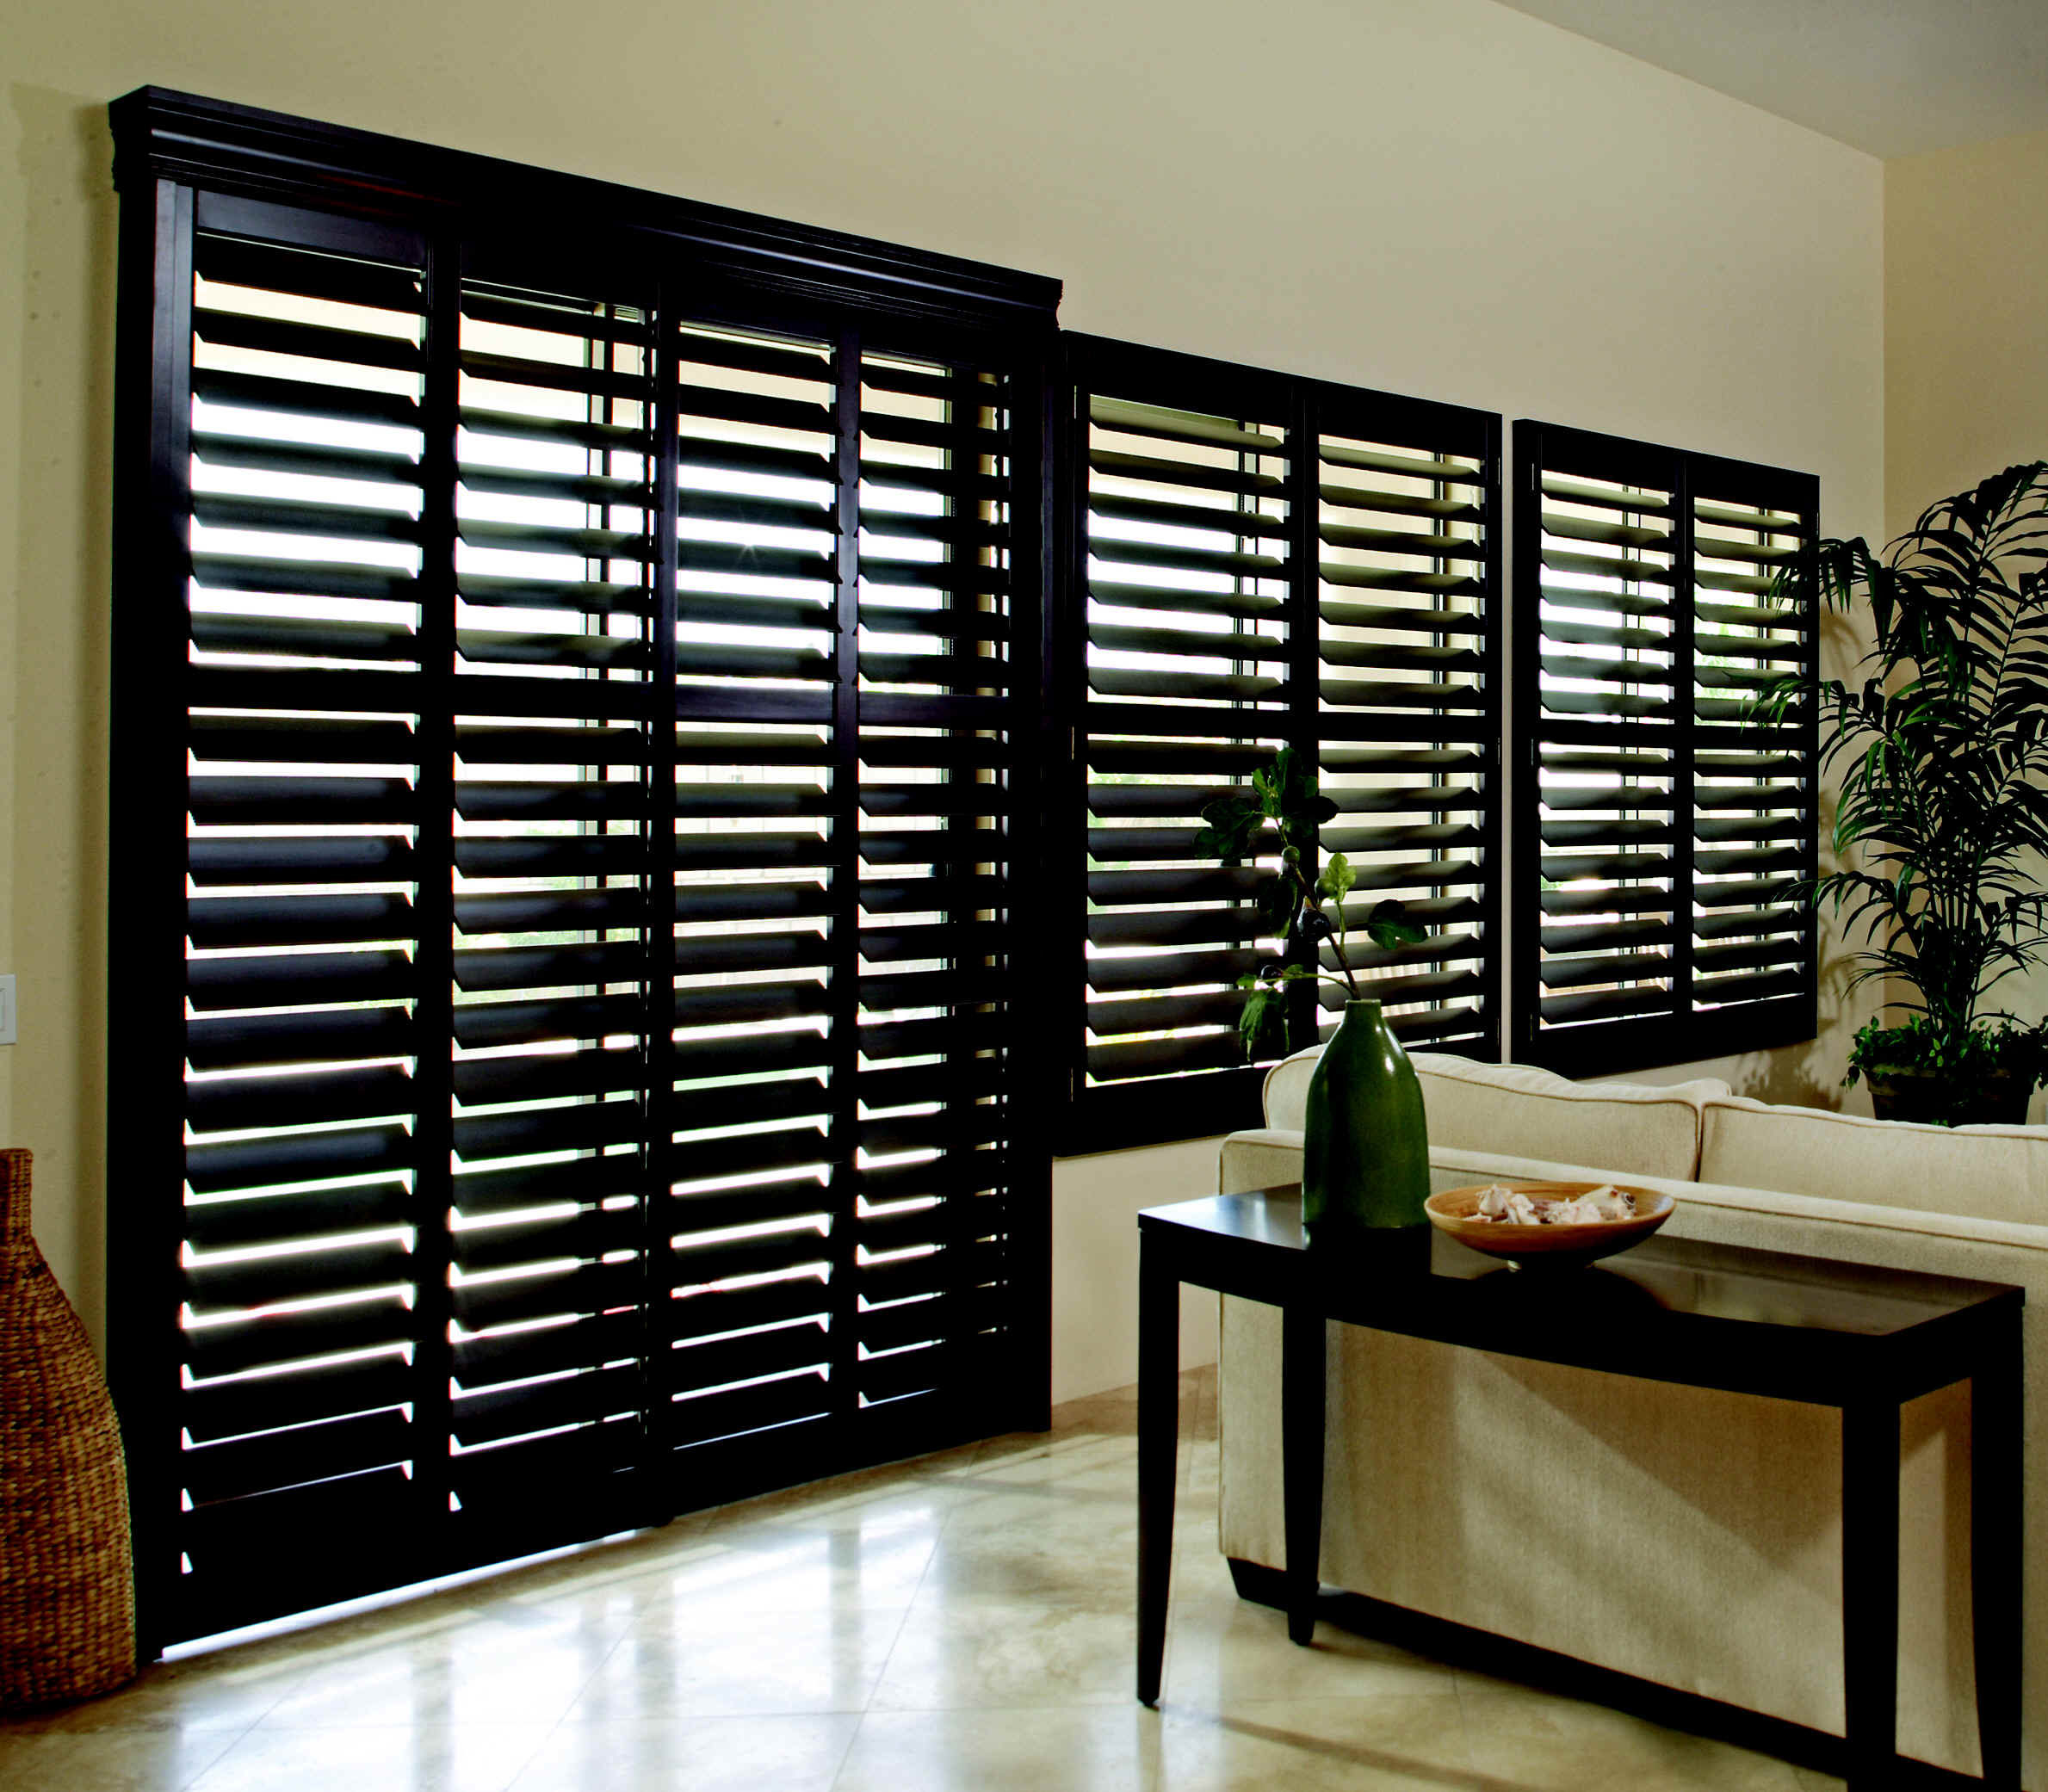 Clearview Shutters For Sale At Low Prices in Liberty